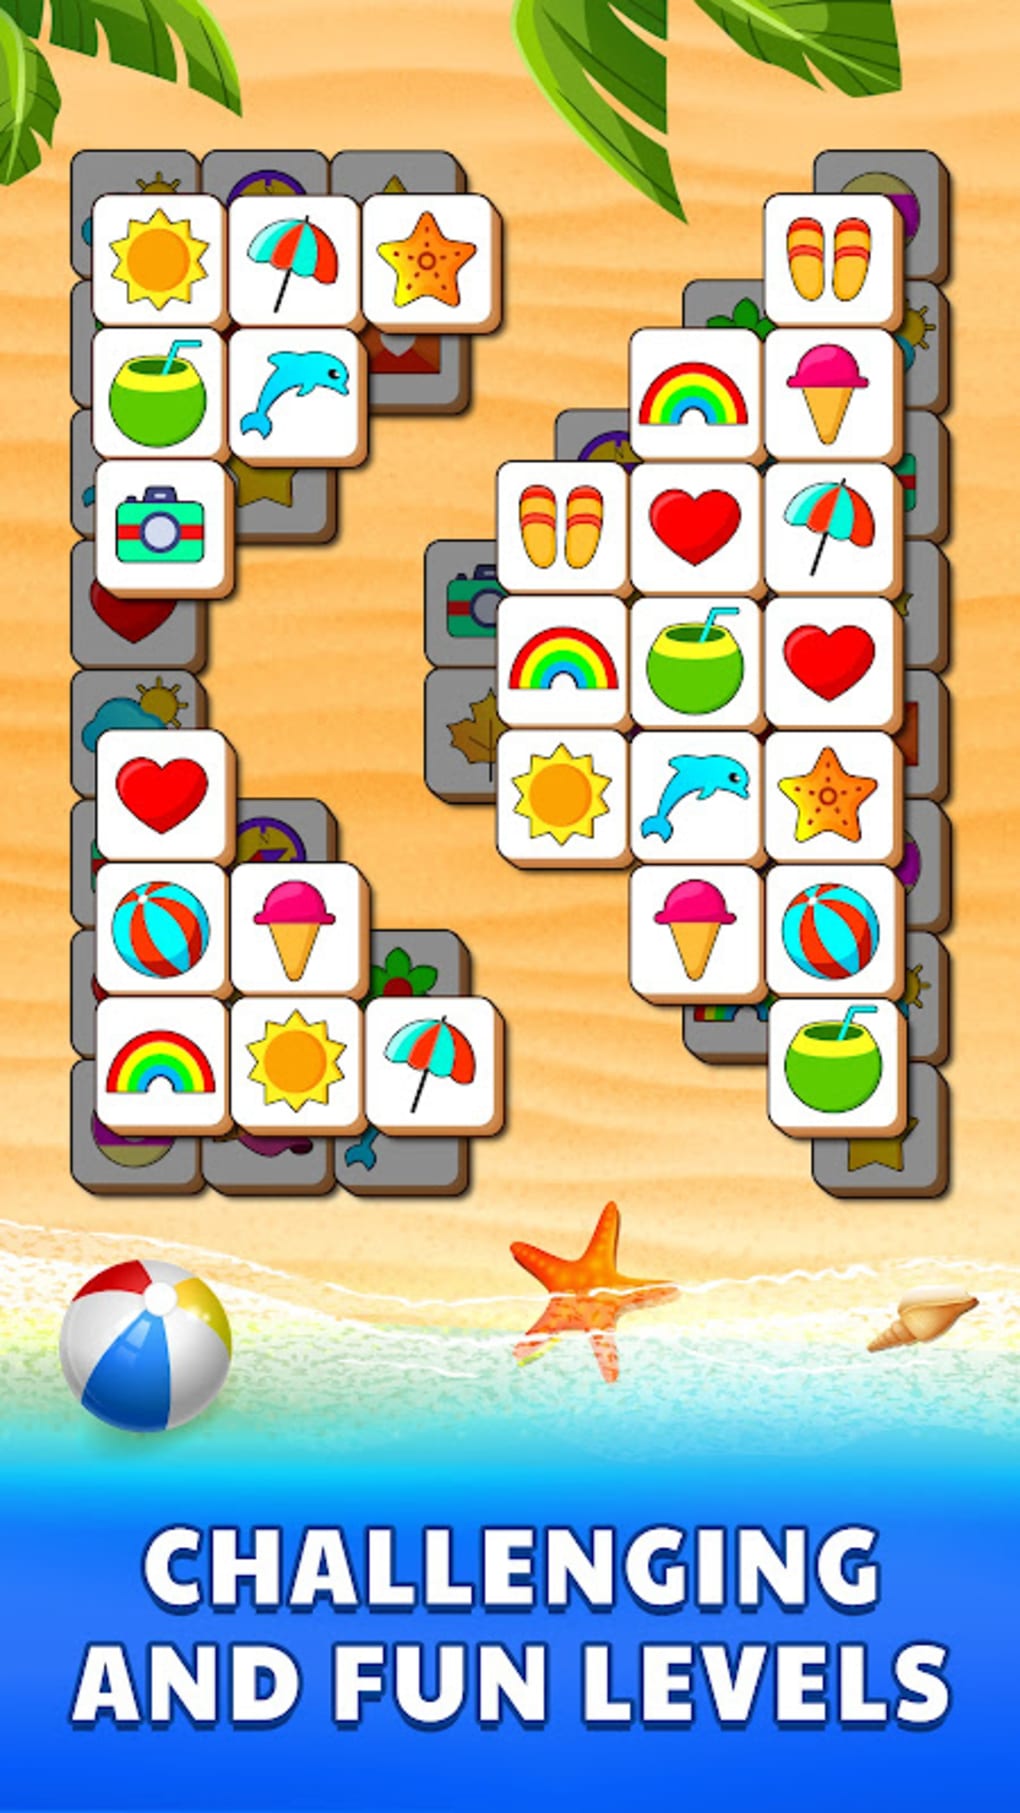 Tile Puzzle Game: Tiles Match free